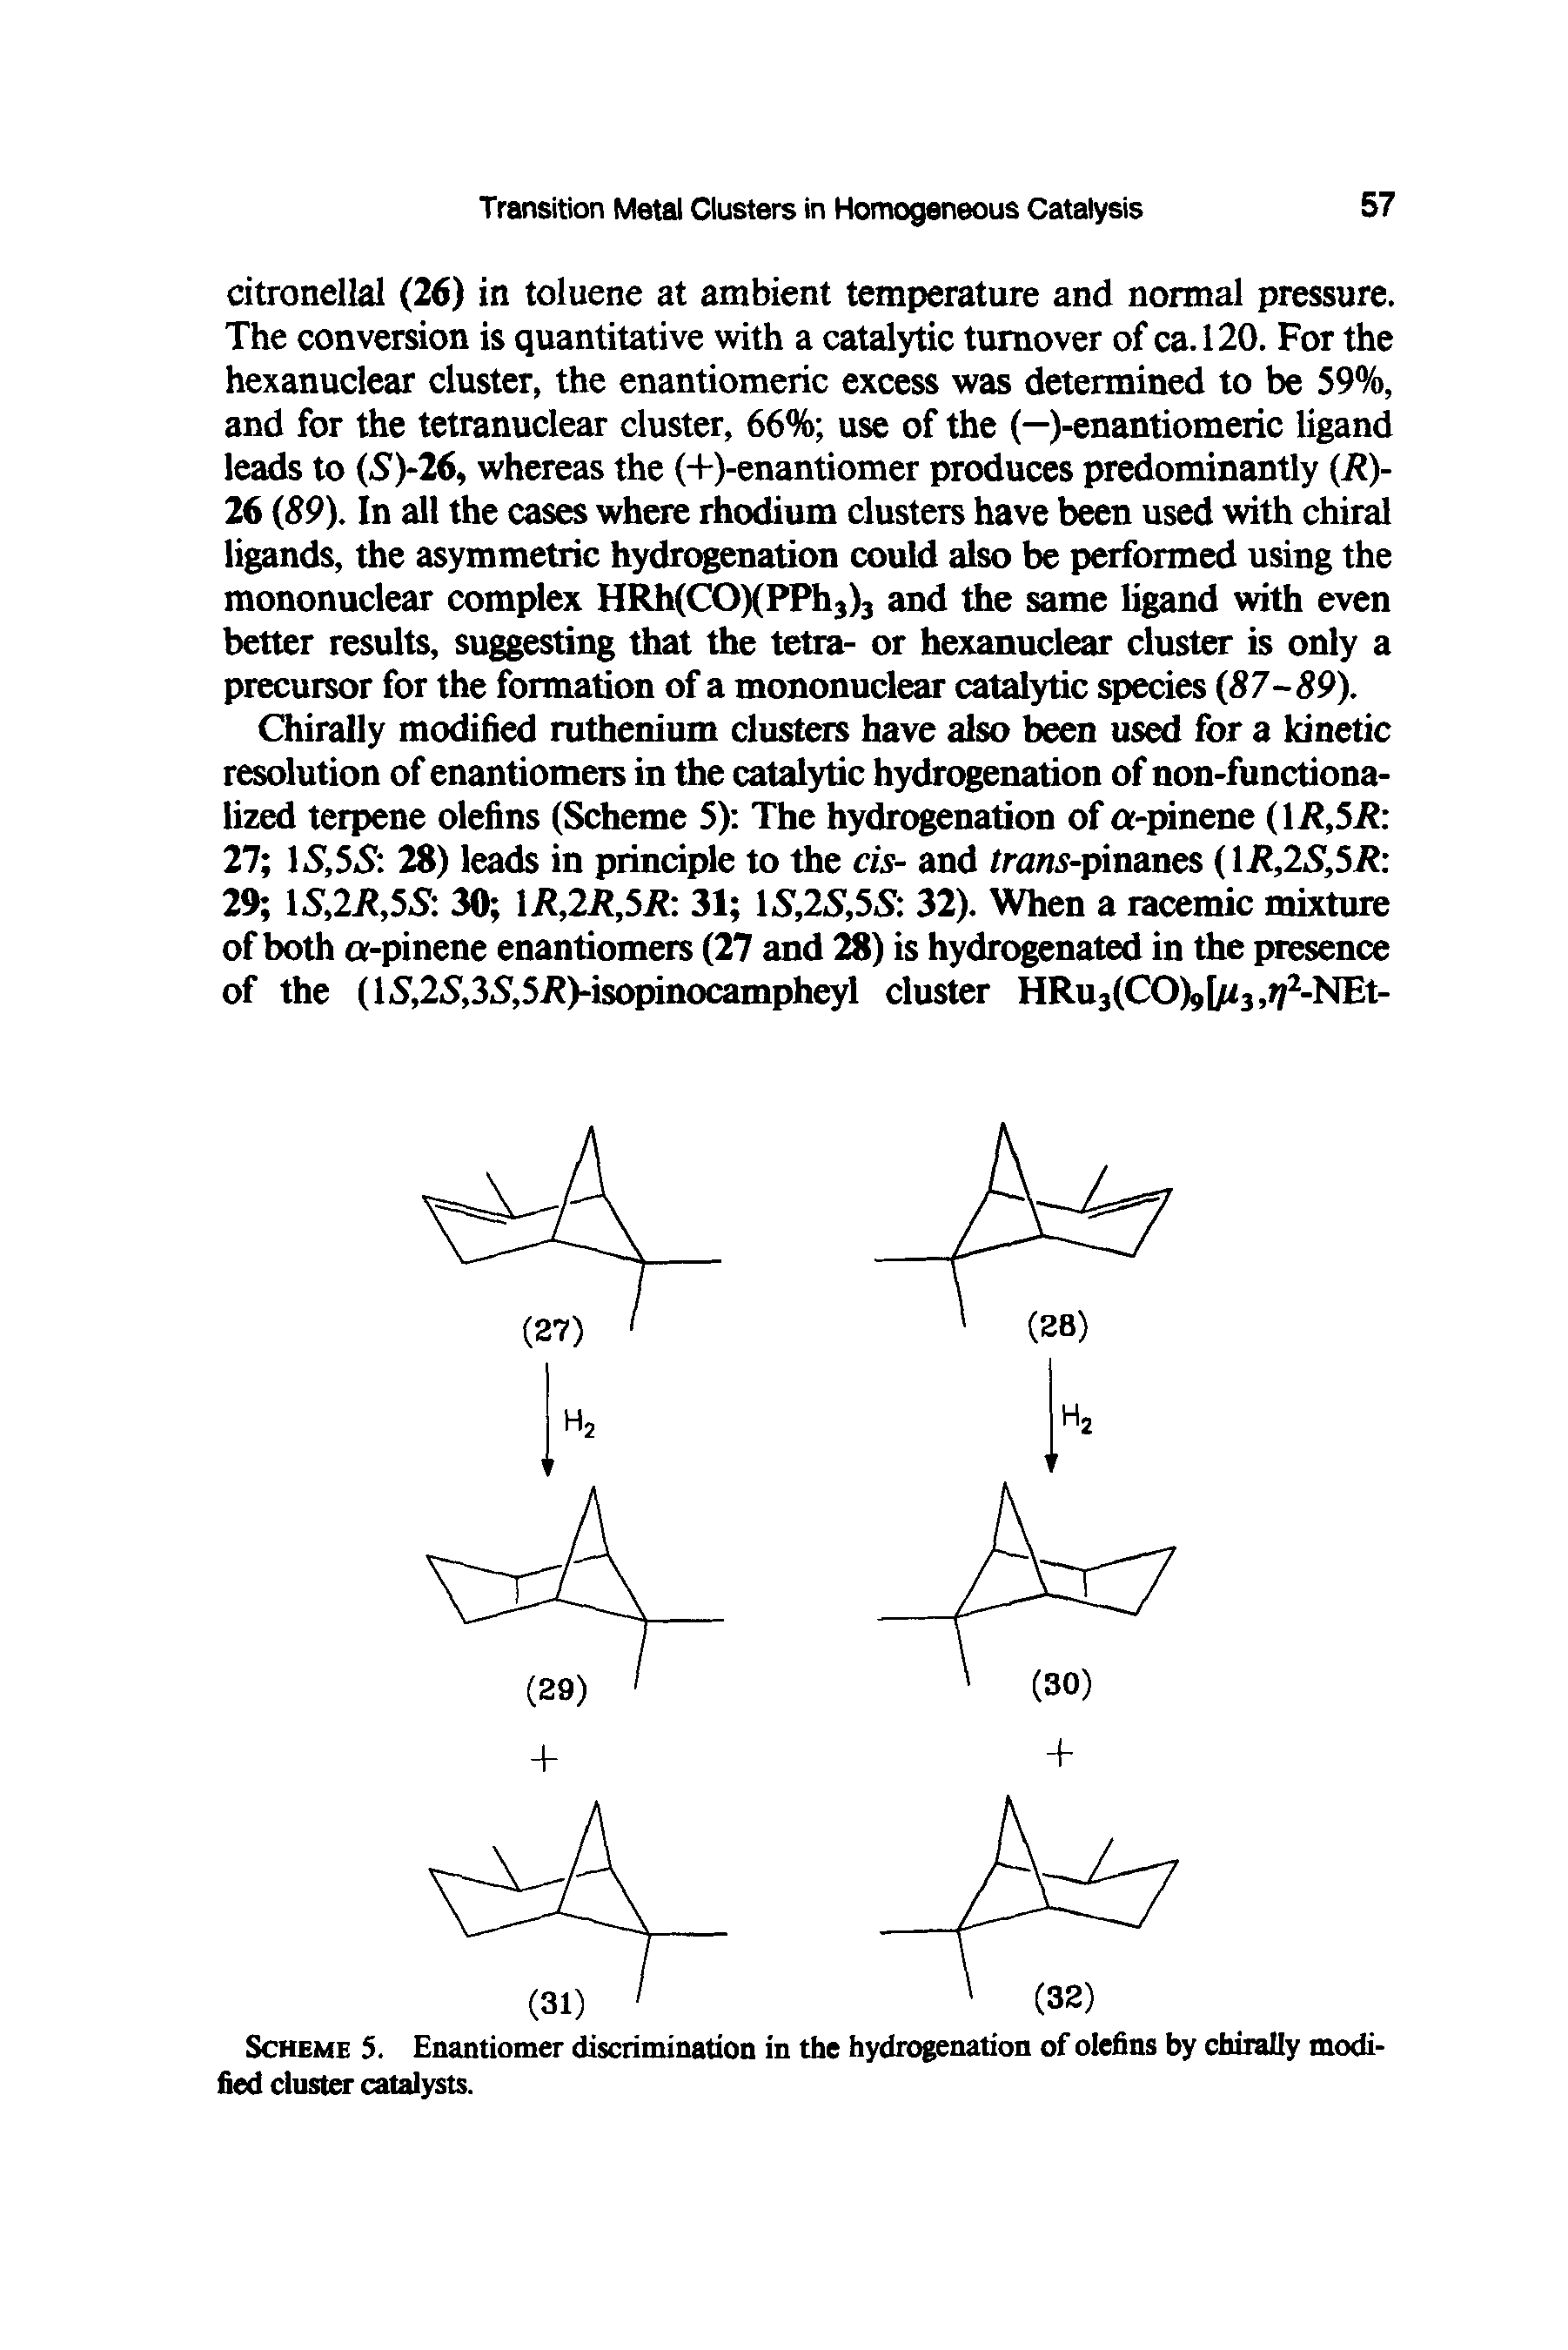 Scheme 5. Enantiomer discrimination in the hydrogenation of olefins by chirally modified cluster catalysts.